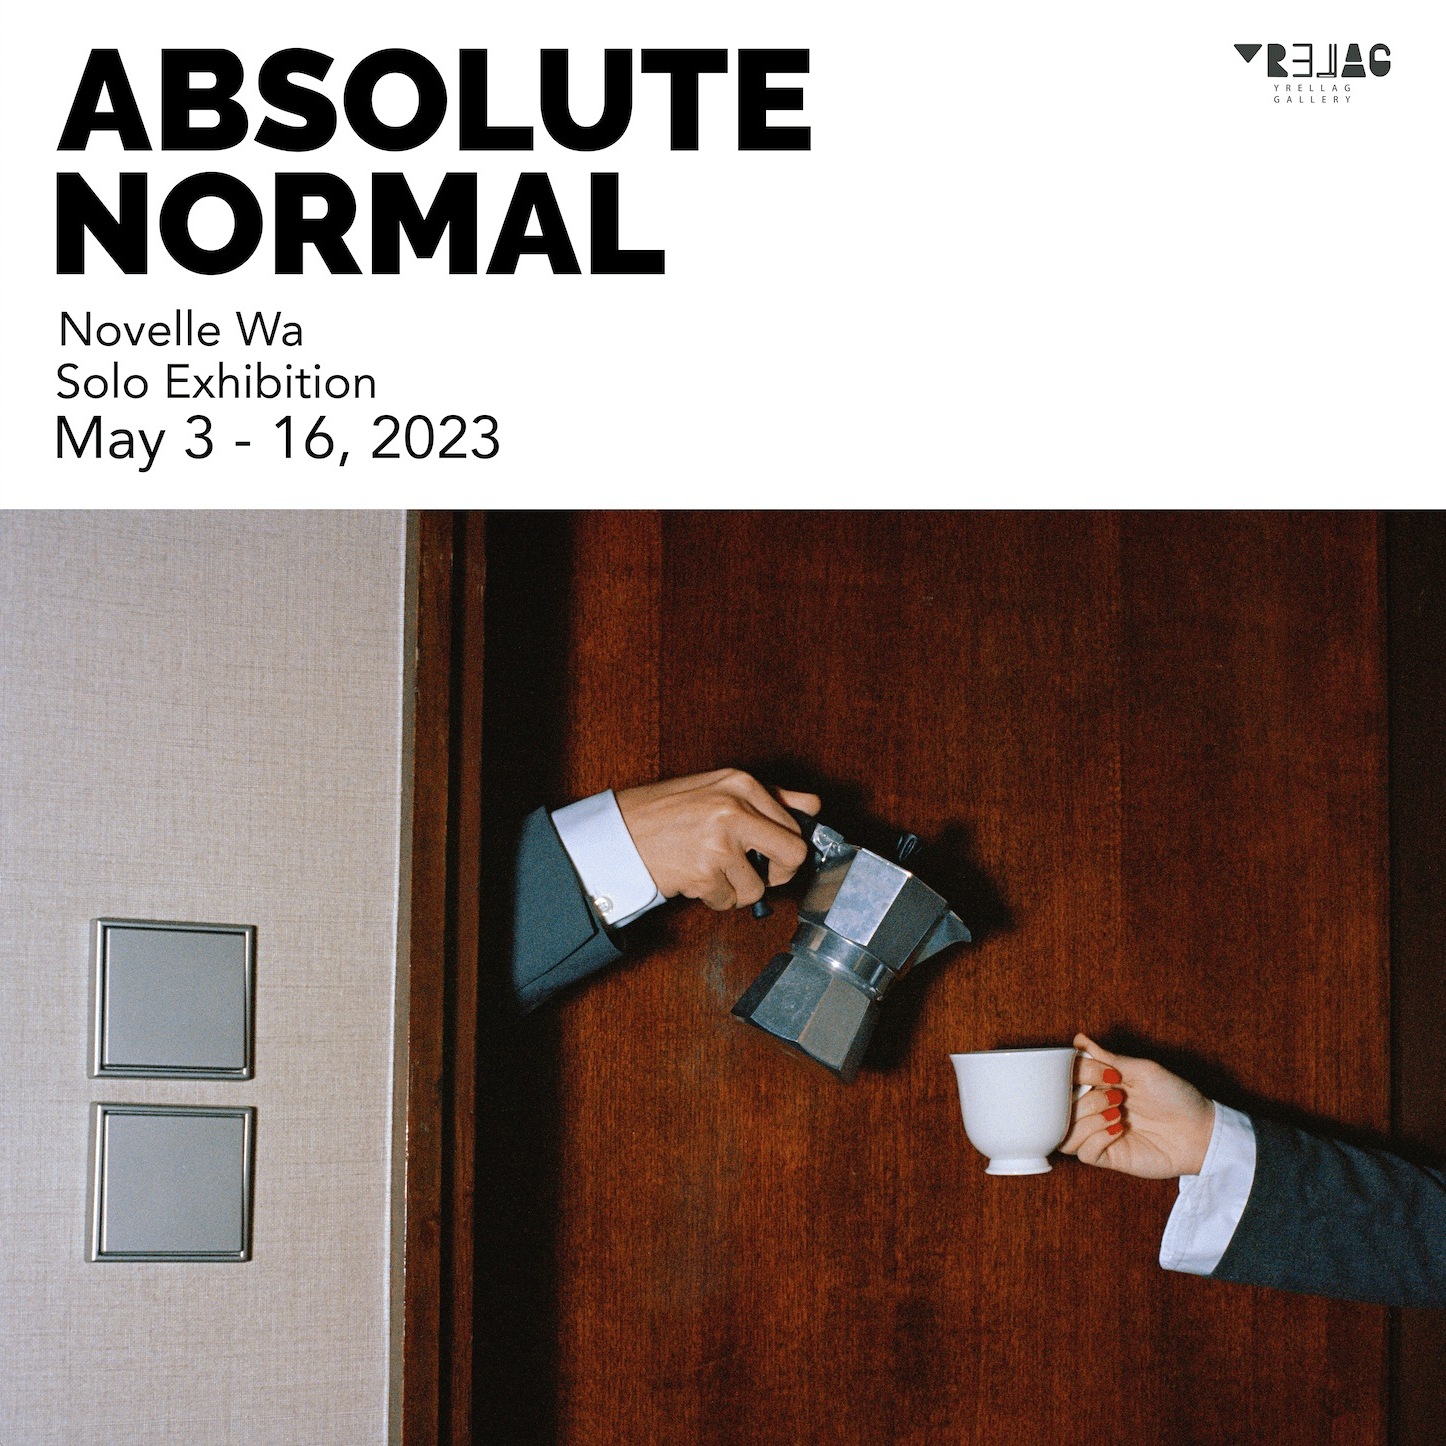 Absolute Normal | Novelle Wa Solo Exhibition